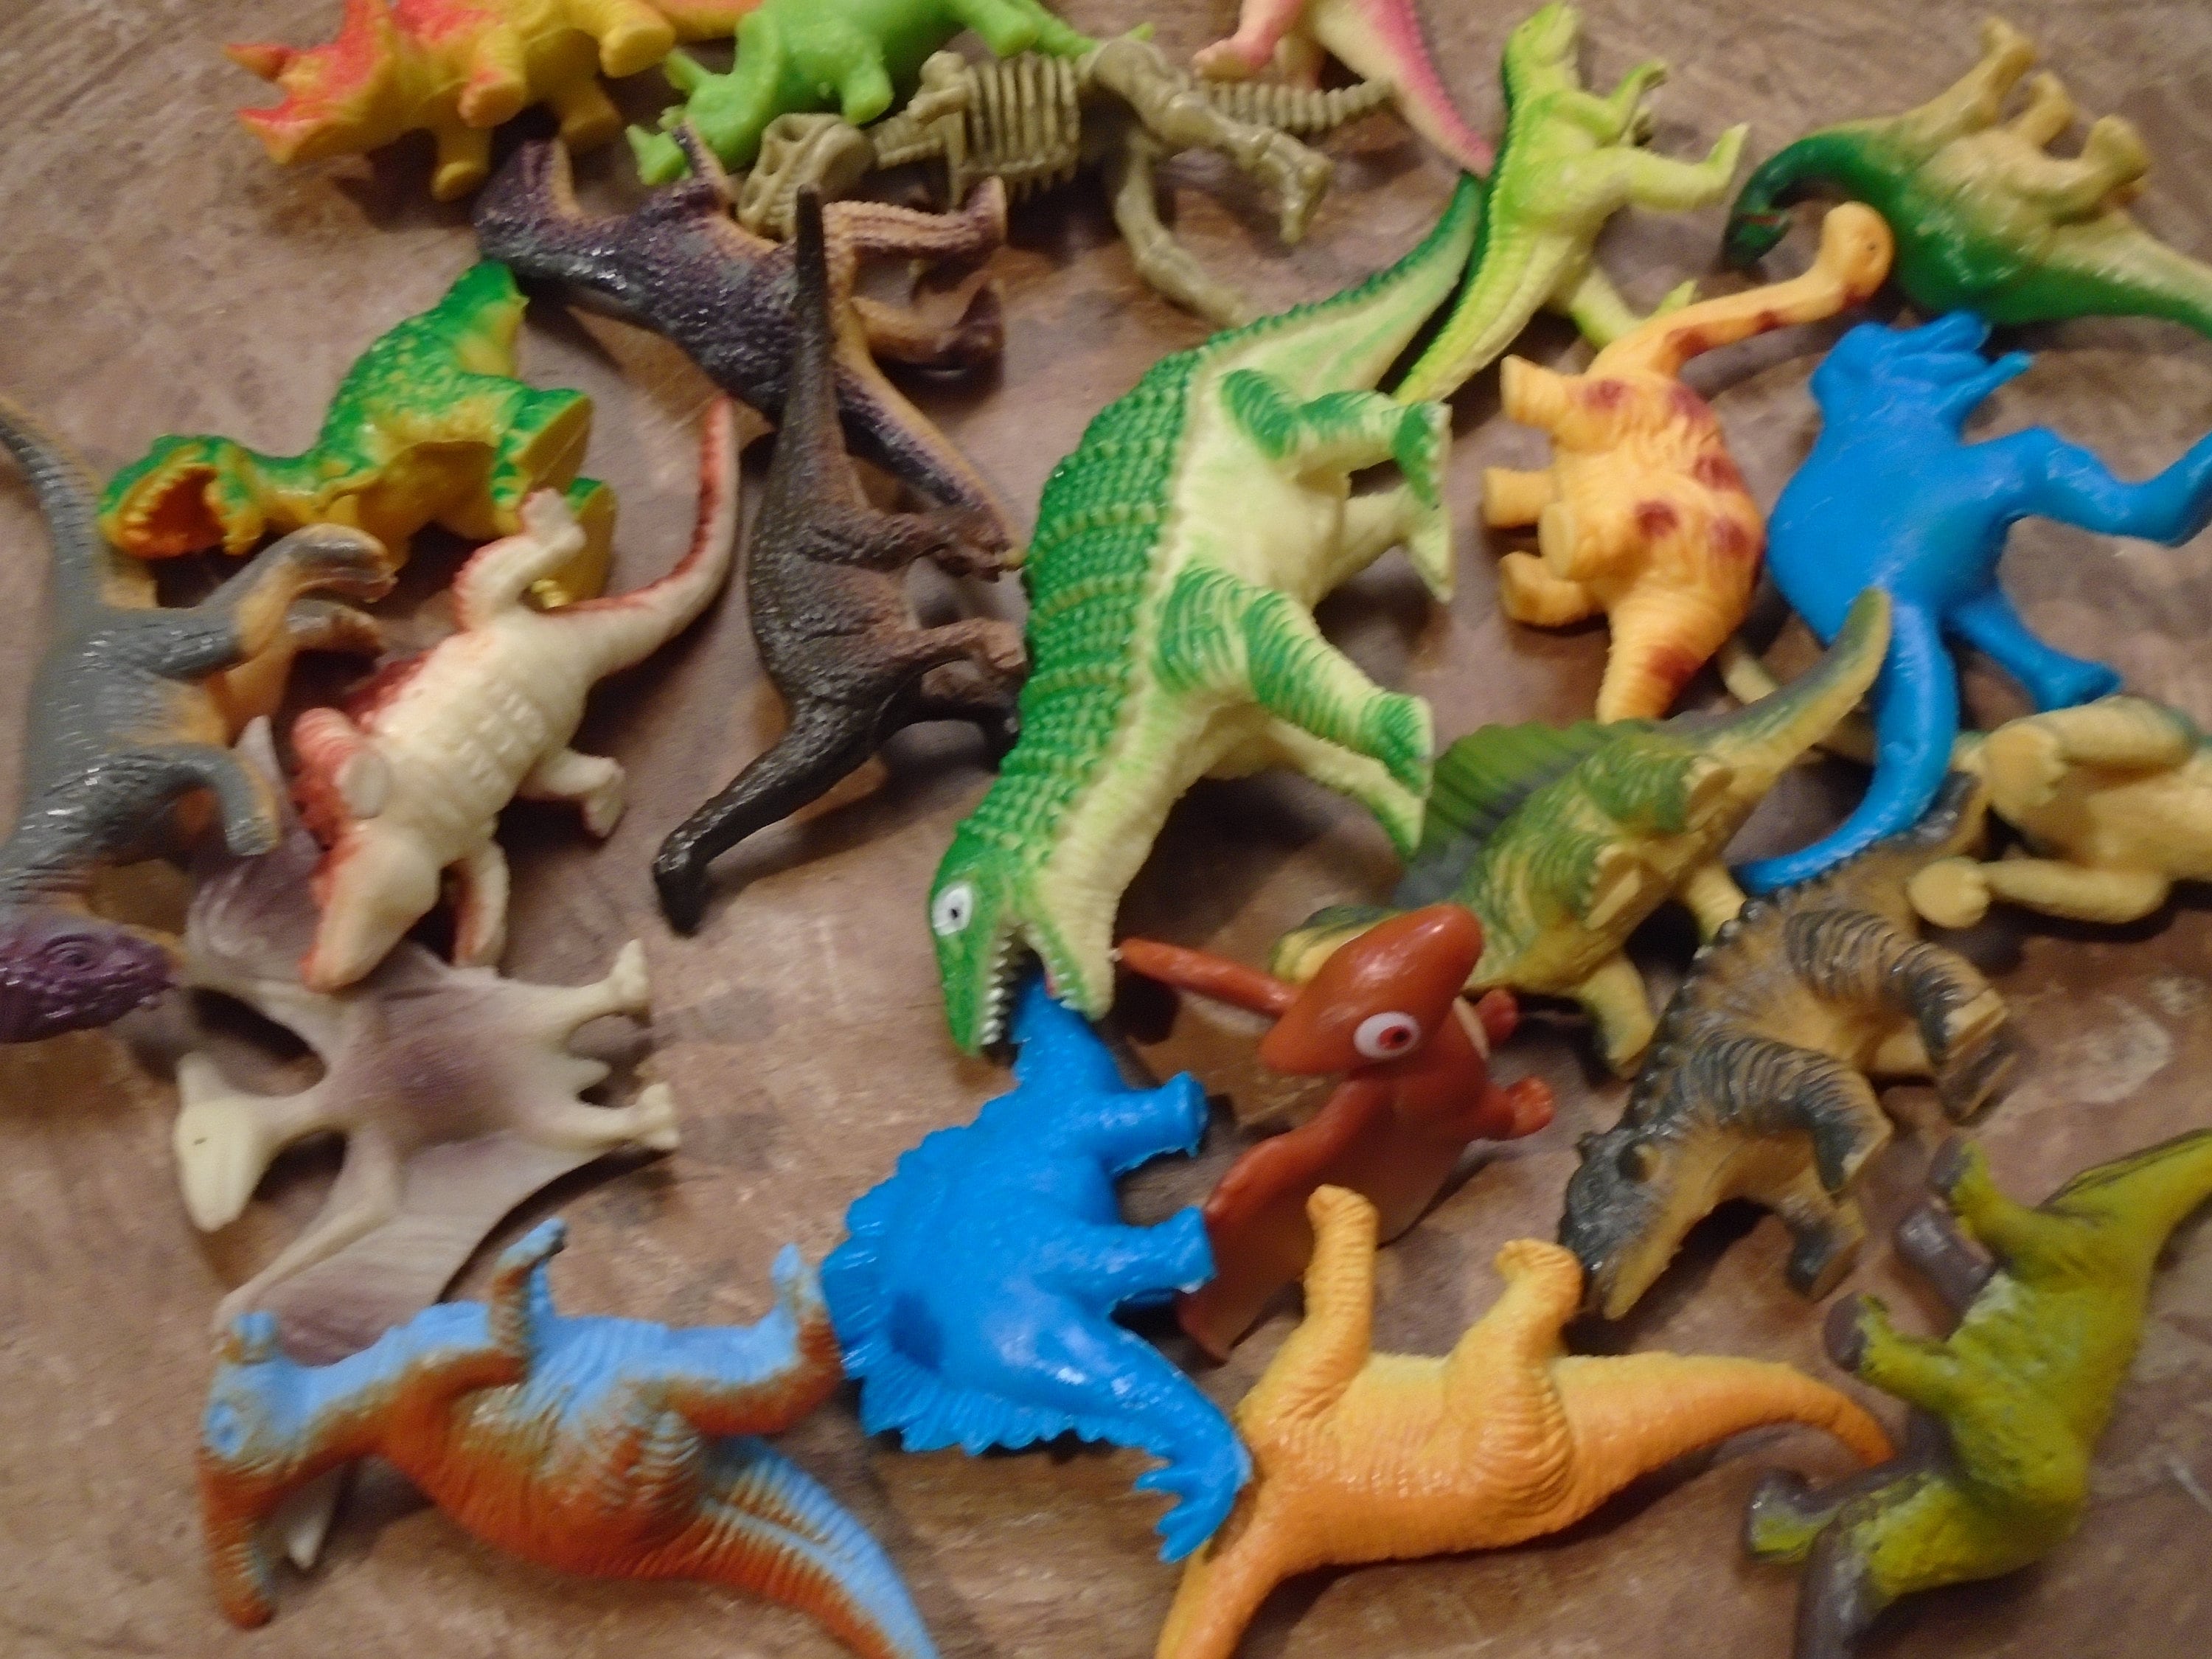 Educational Dinosaur Figures Party Supplies and Cake Decorations 90 Piece Mini Dinosaur Toys Plastic Dinosaurs Set for Kids 